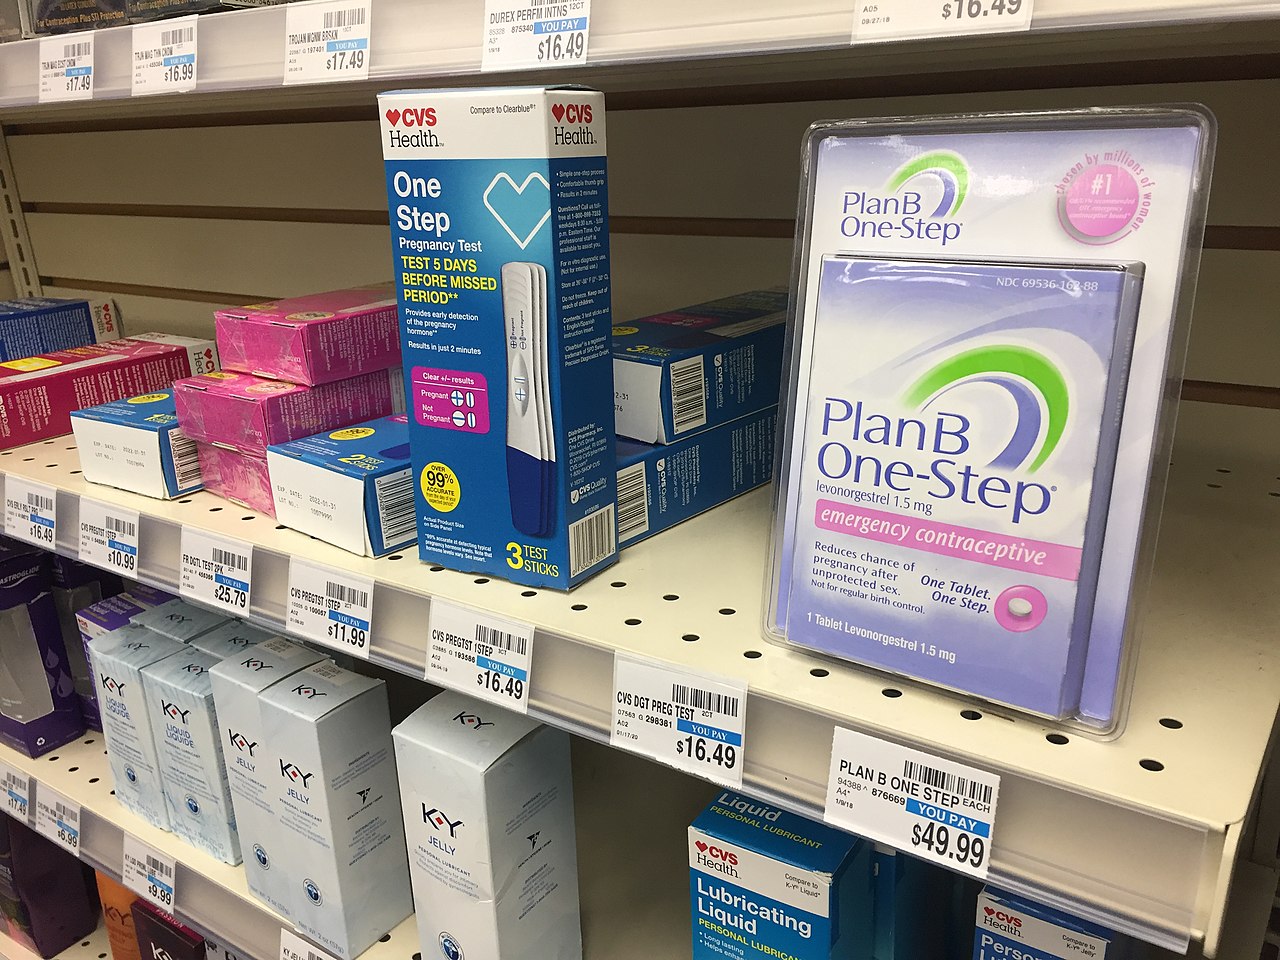 US drug administration: emergency contraceptives are not abortifacients